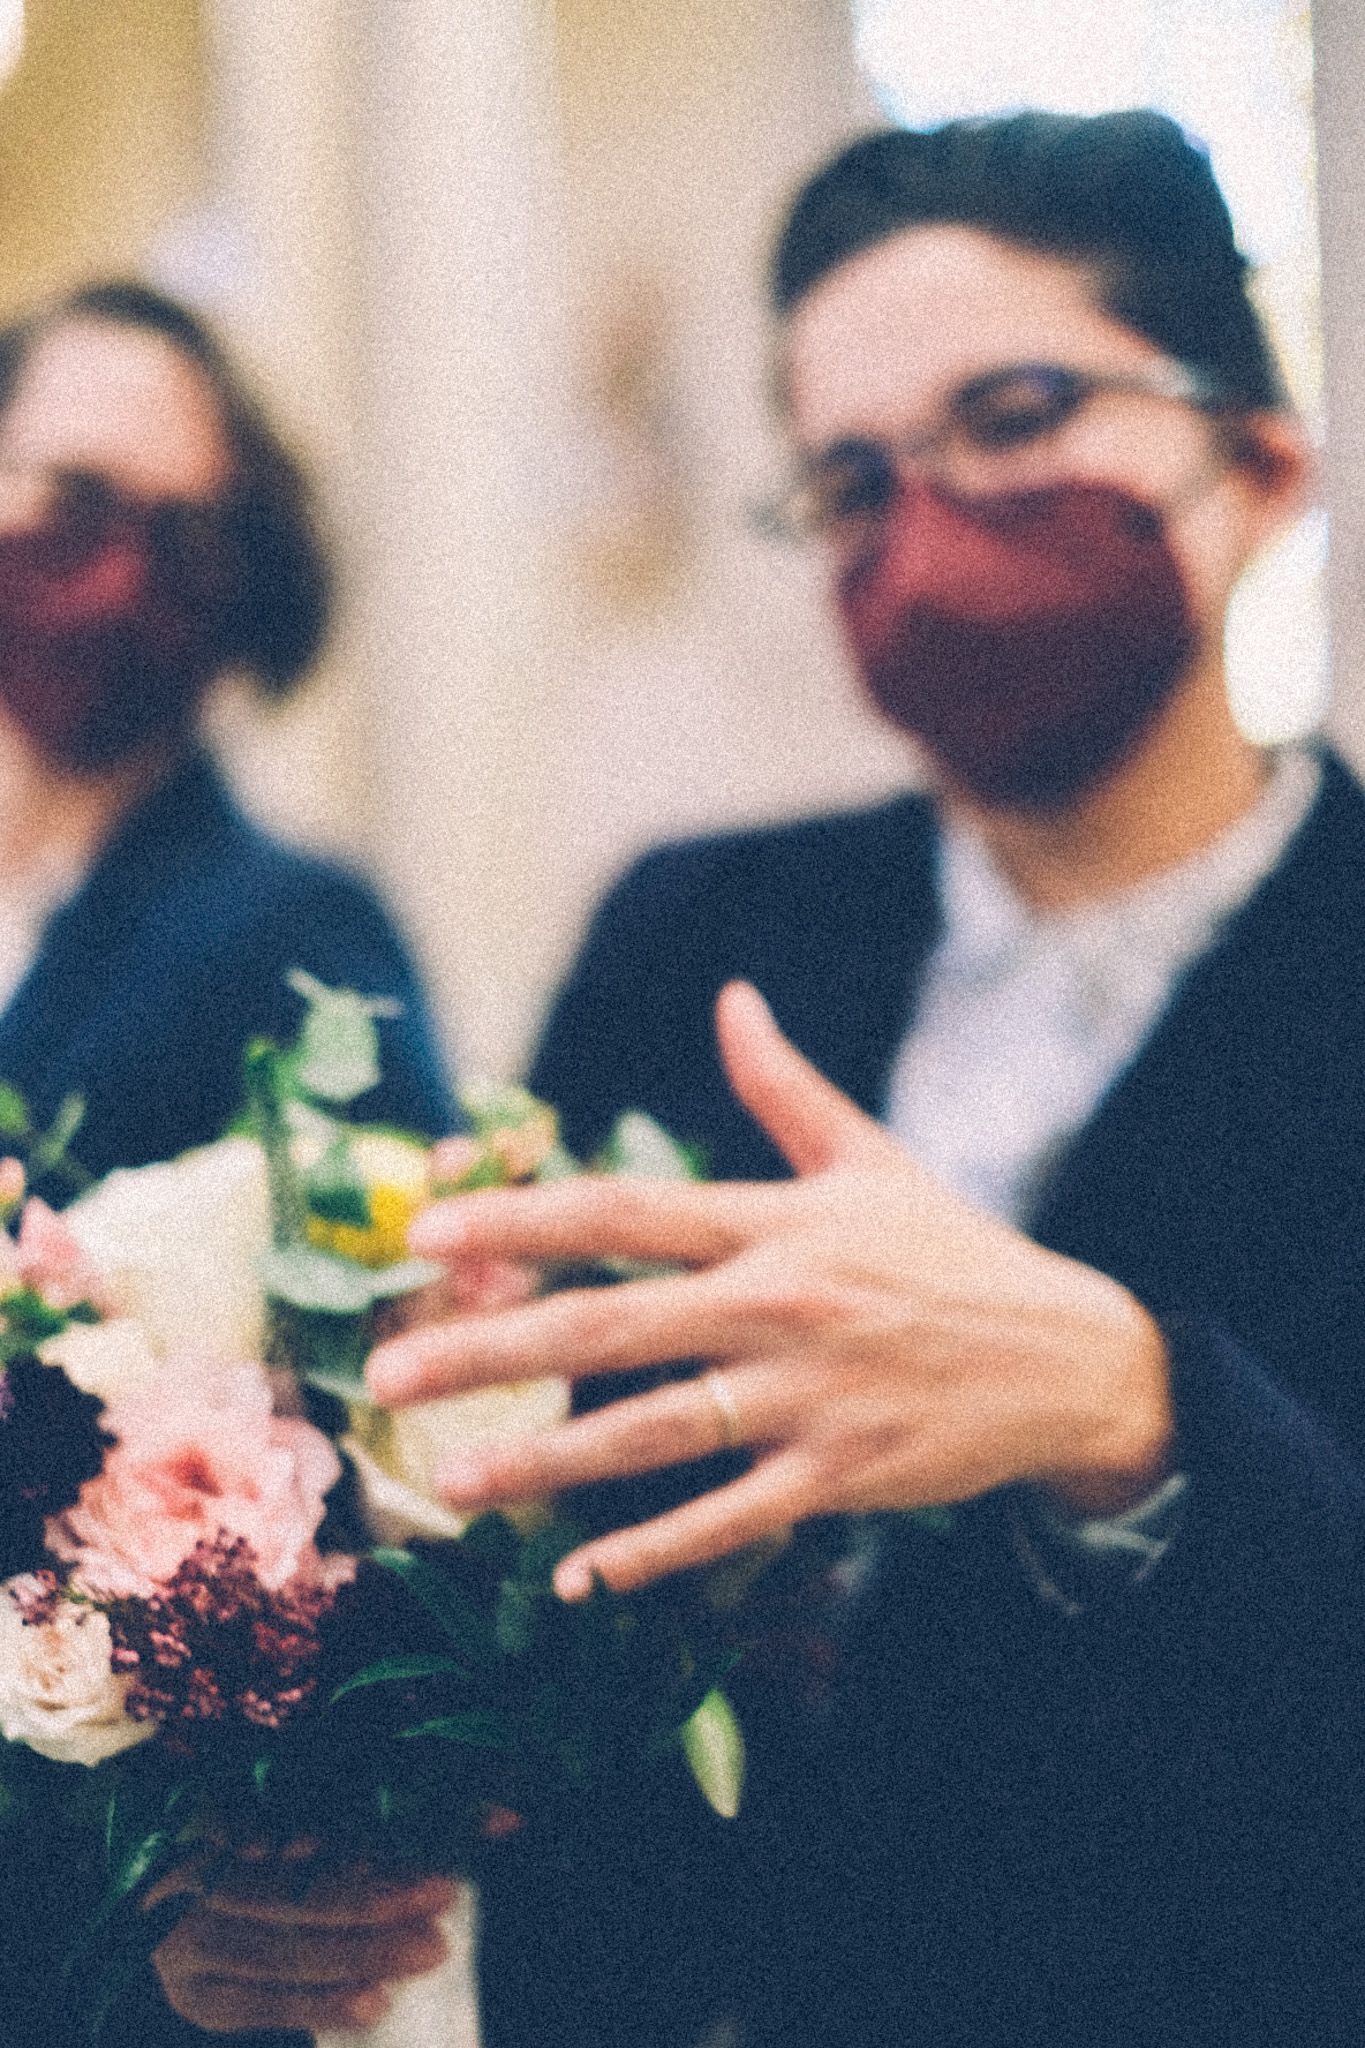 Two women in well-tailored blue suits and maroon masks lean against church pews, out of focus. The one in the foreground flashes her hand over a bouquet of burgundy, pink, and white wedding flowers.